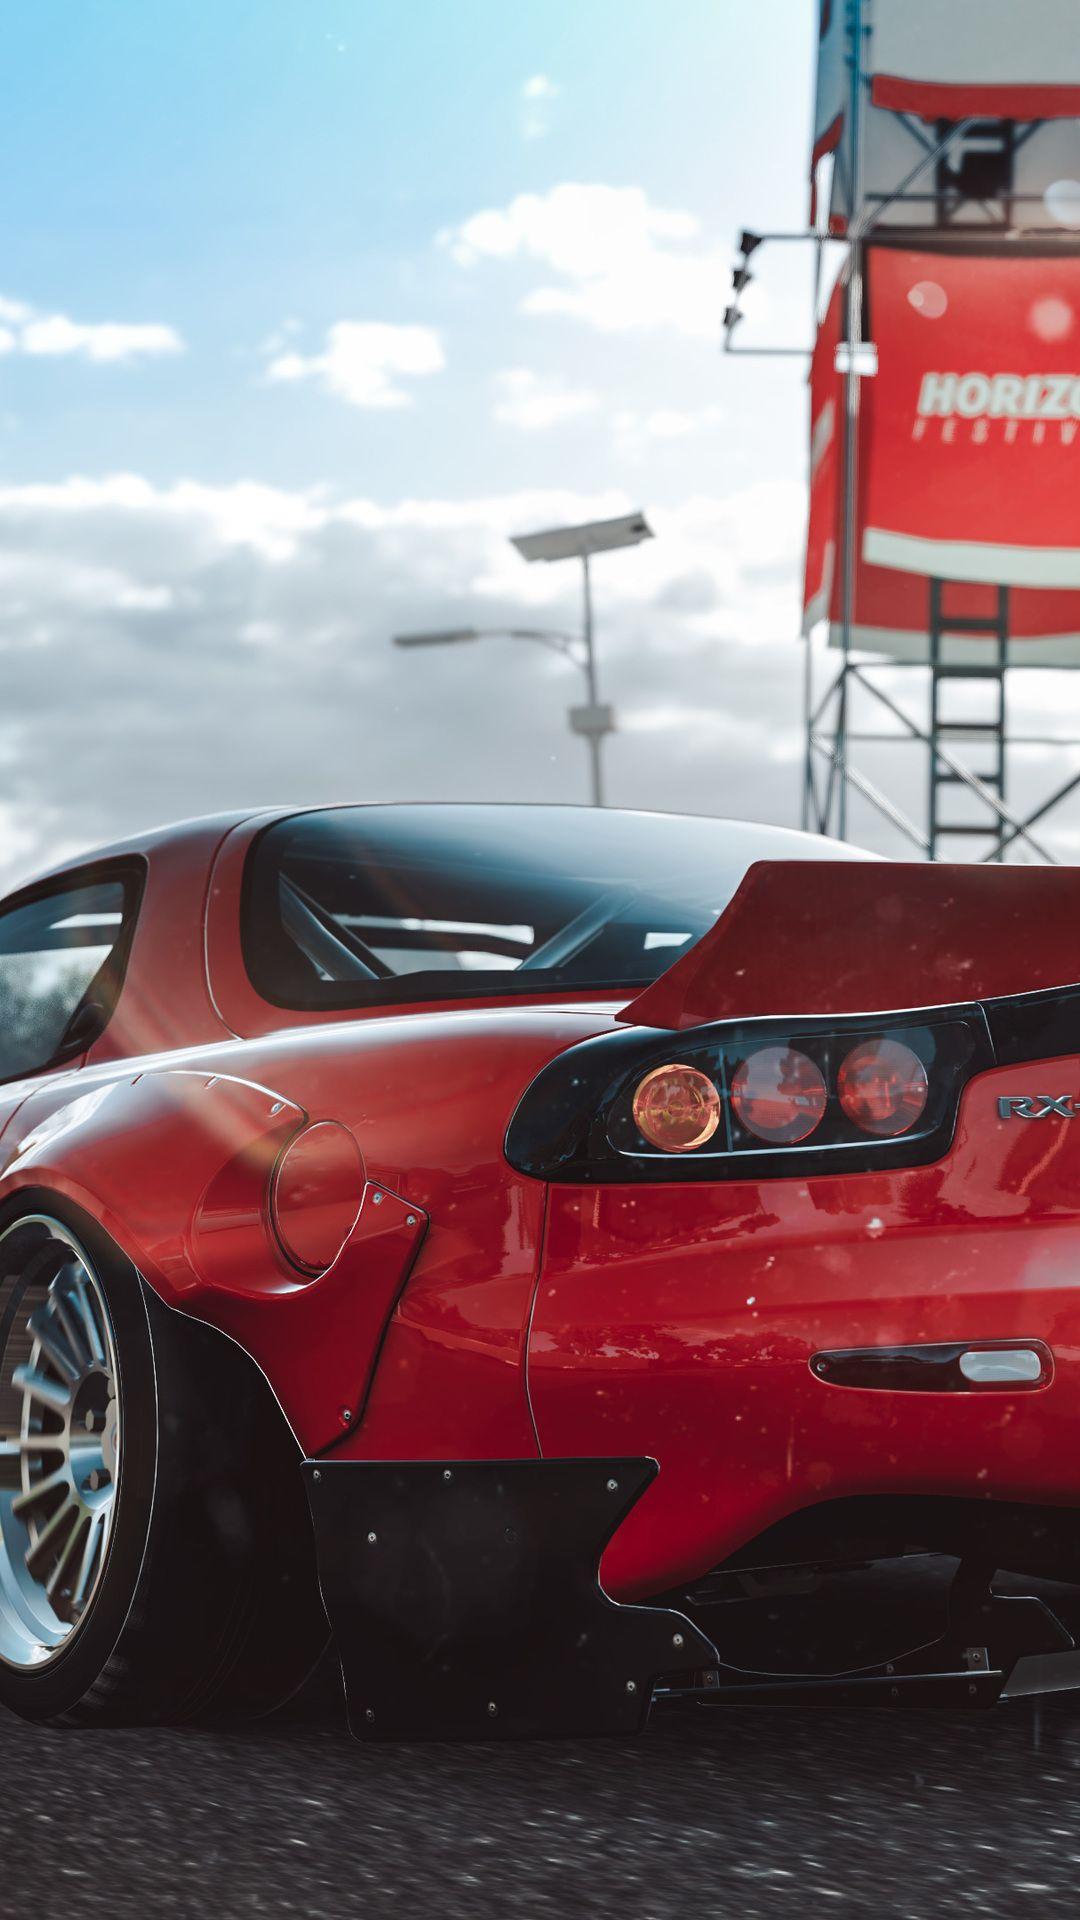 Mazda Rx-7 wallpapers - backiee